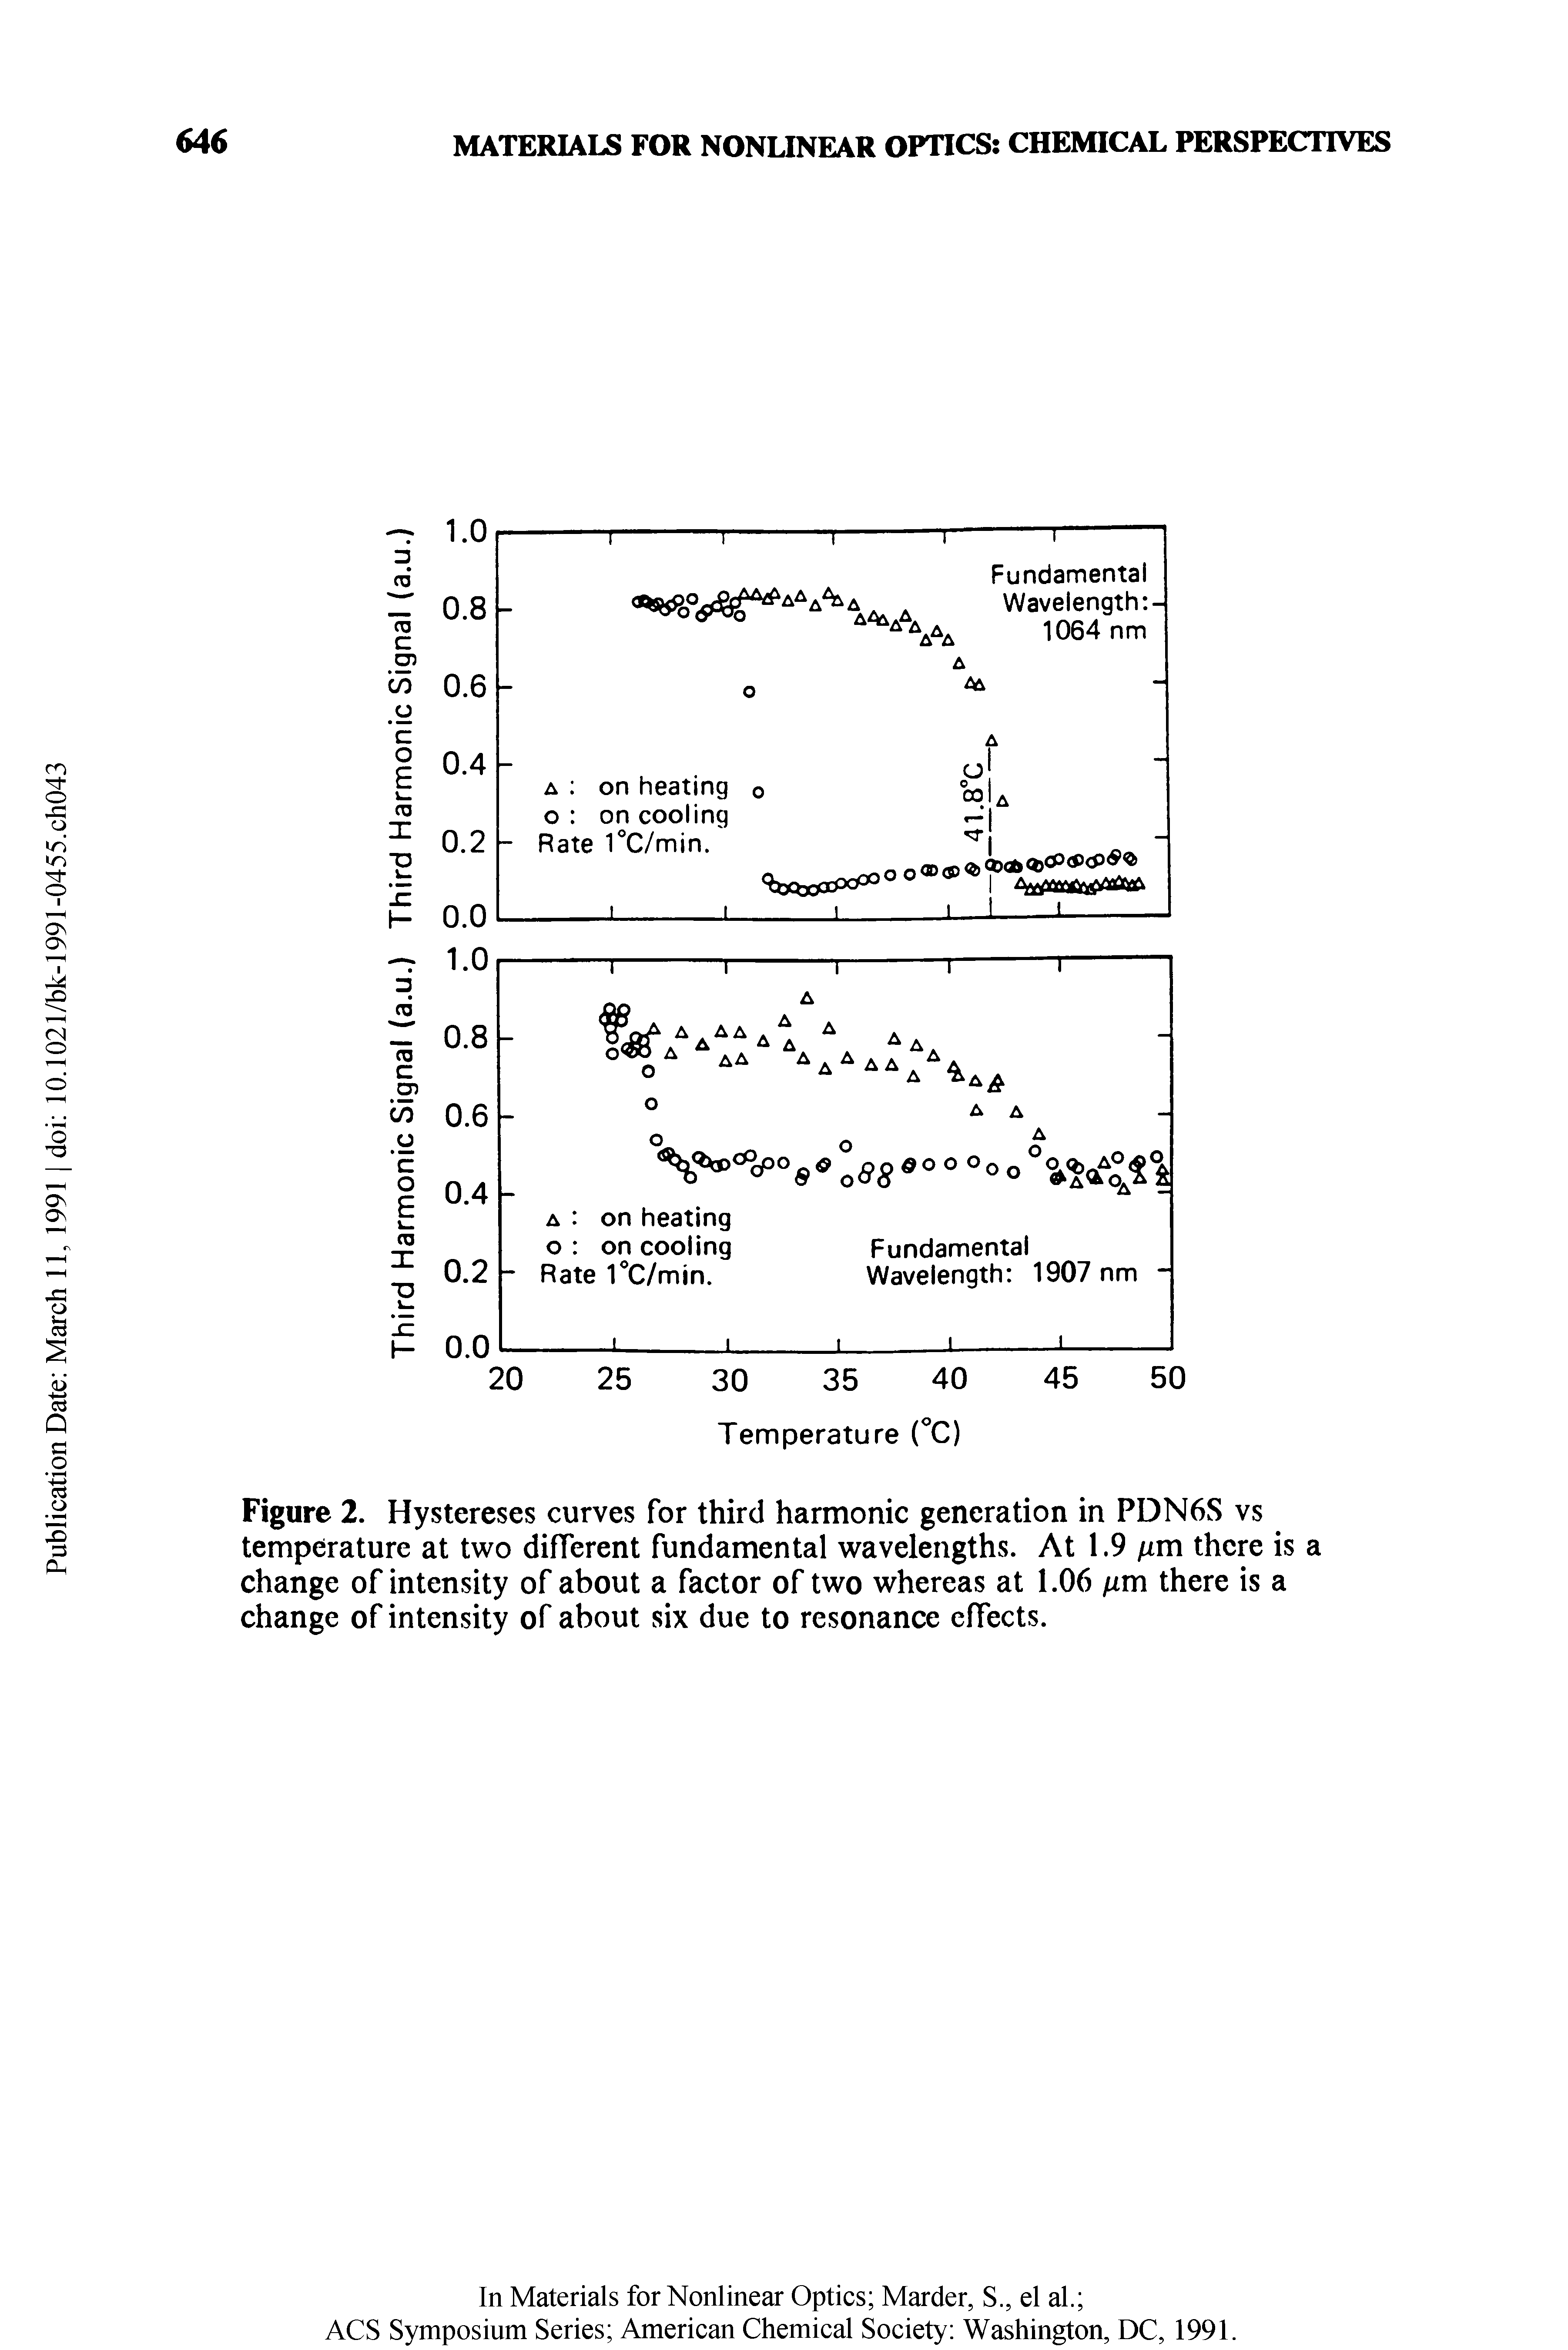 Figure 2. Hystereses curves for third harmonic generation in PDN6S vs temperature at two different fundamental wavelengths. At 1.9 /mi there is a change of intensity of about a factor of two whereas at 1.06 /mi there is a change of intensity of about six due to resonance effects.